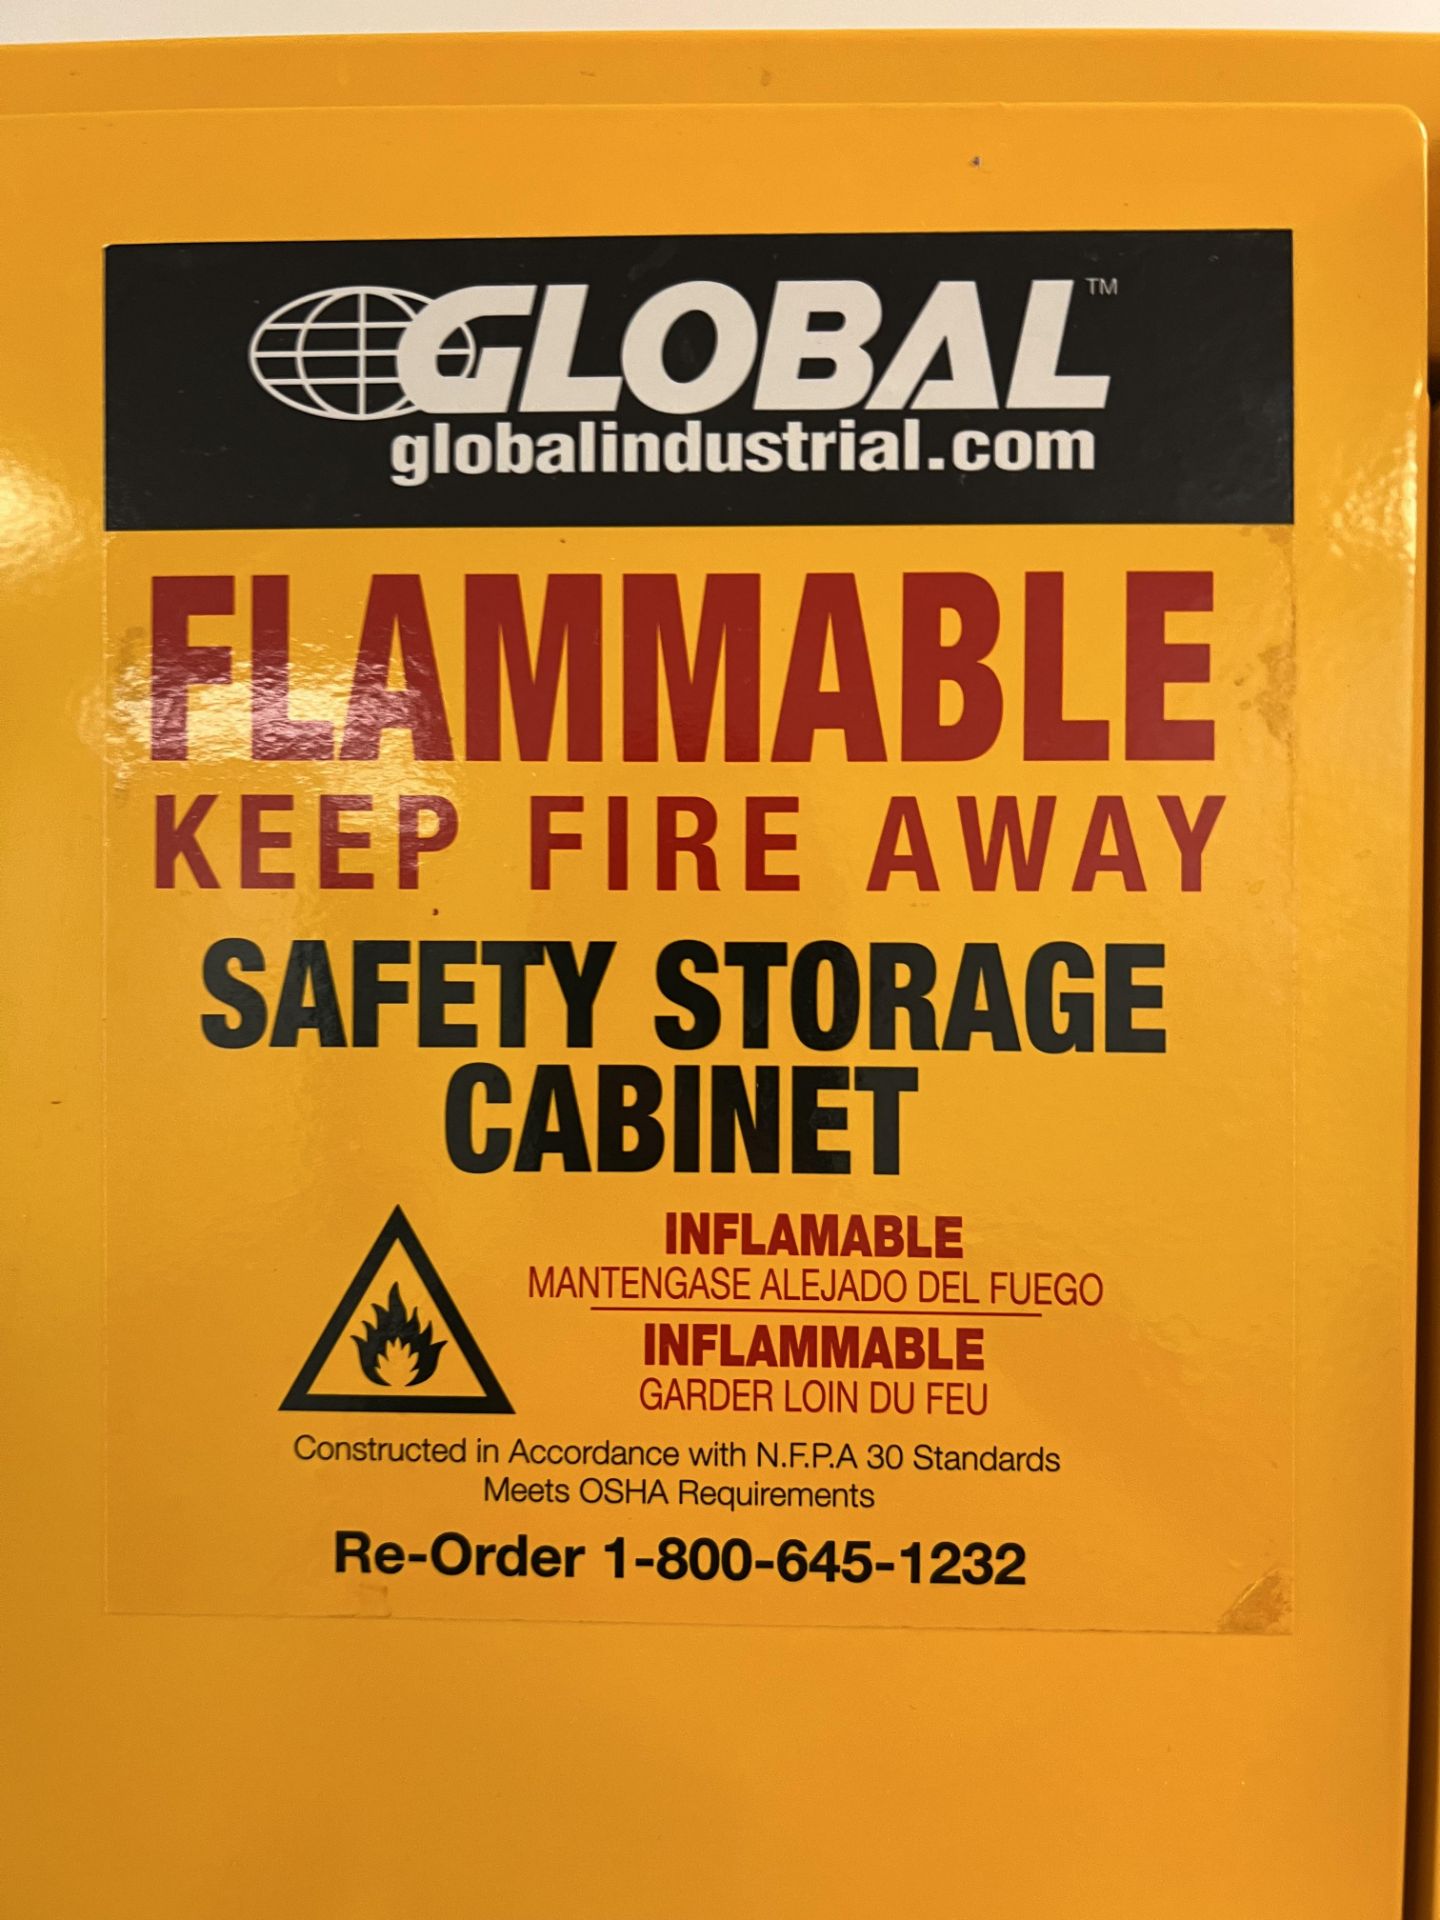 GLOBAL INDUSTRIAL SAFETY STORAGE CABINET FOR FLAMMABLE LIQUIDS, MODEL 298541 - Image 2 of 5